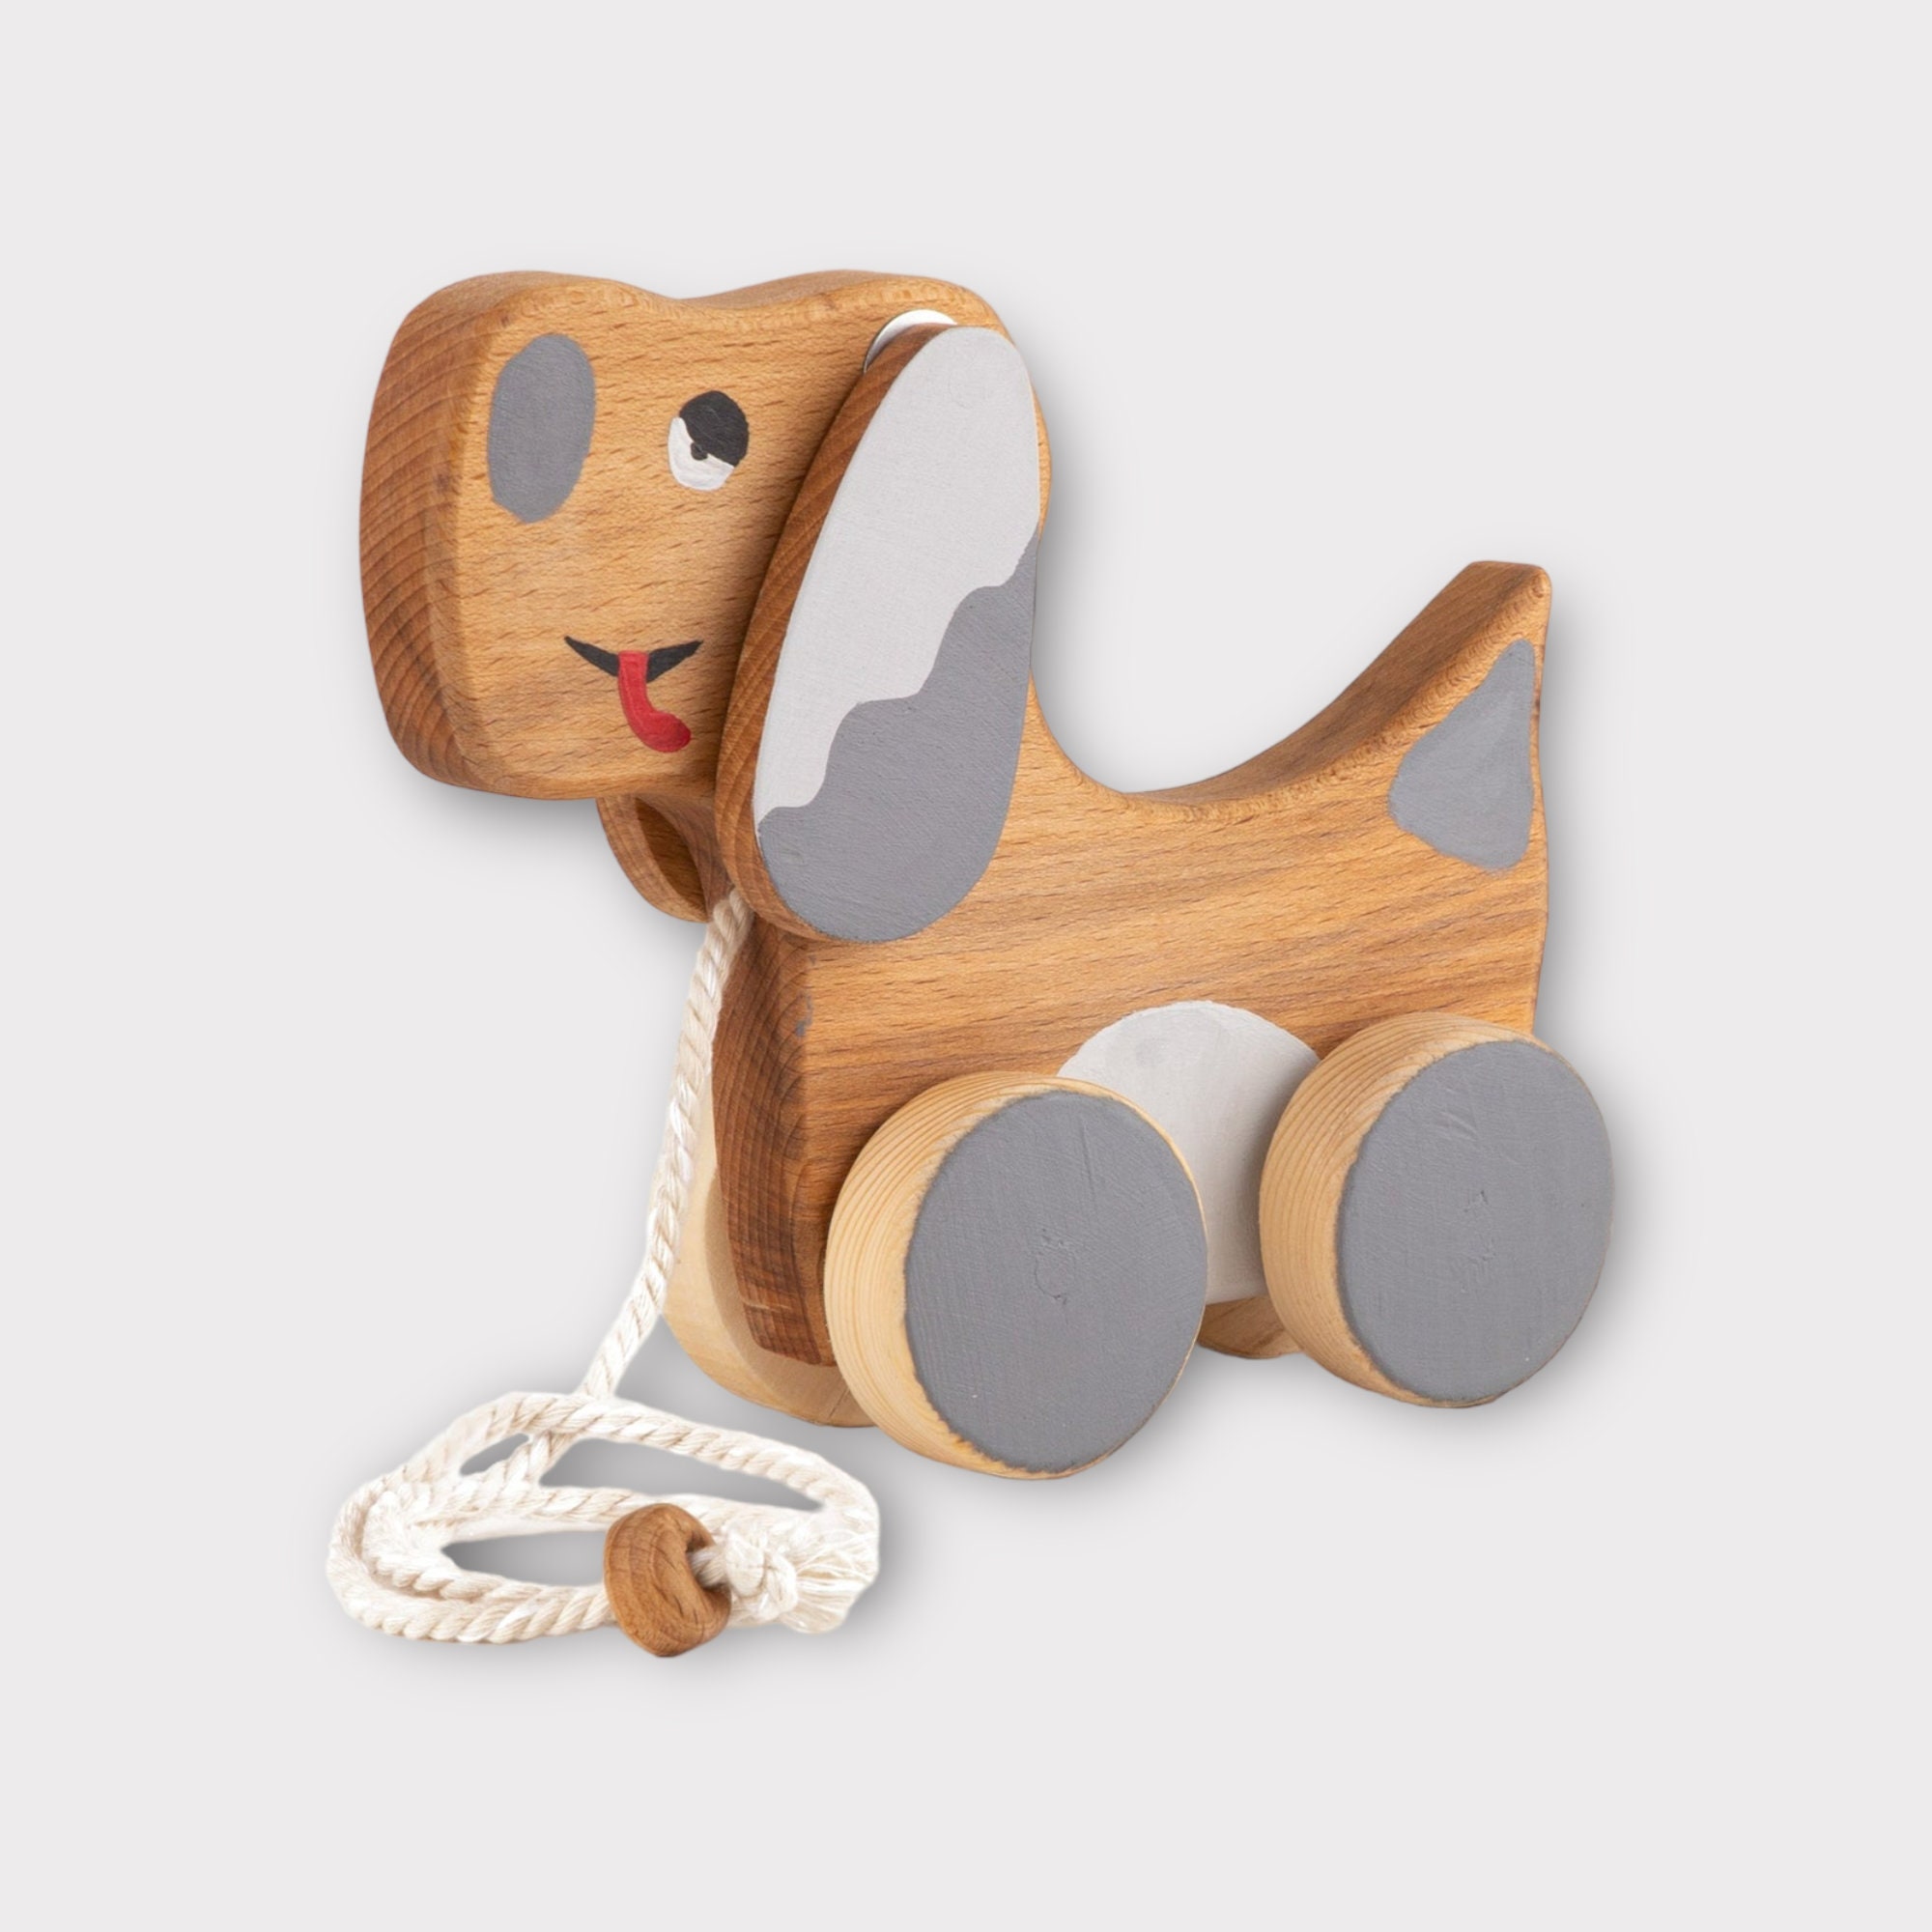 Wooden Toys, Toddler Toys, 1st Birthday Gift, Handmade Wood Toys, Pull Dog  Toy, Wood Toy Dog, Personalized Pull Toy, 